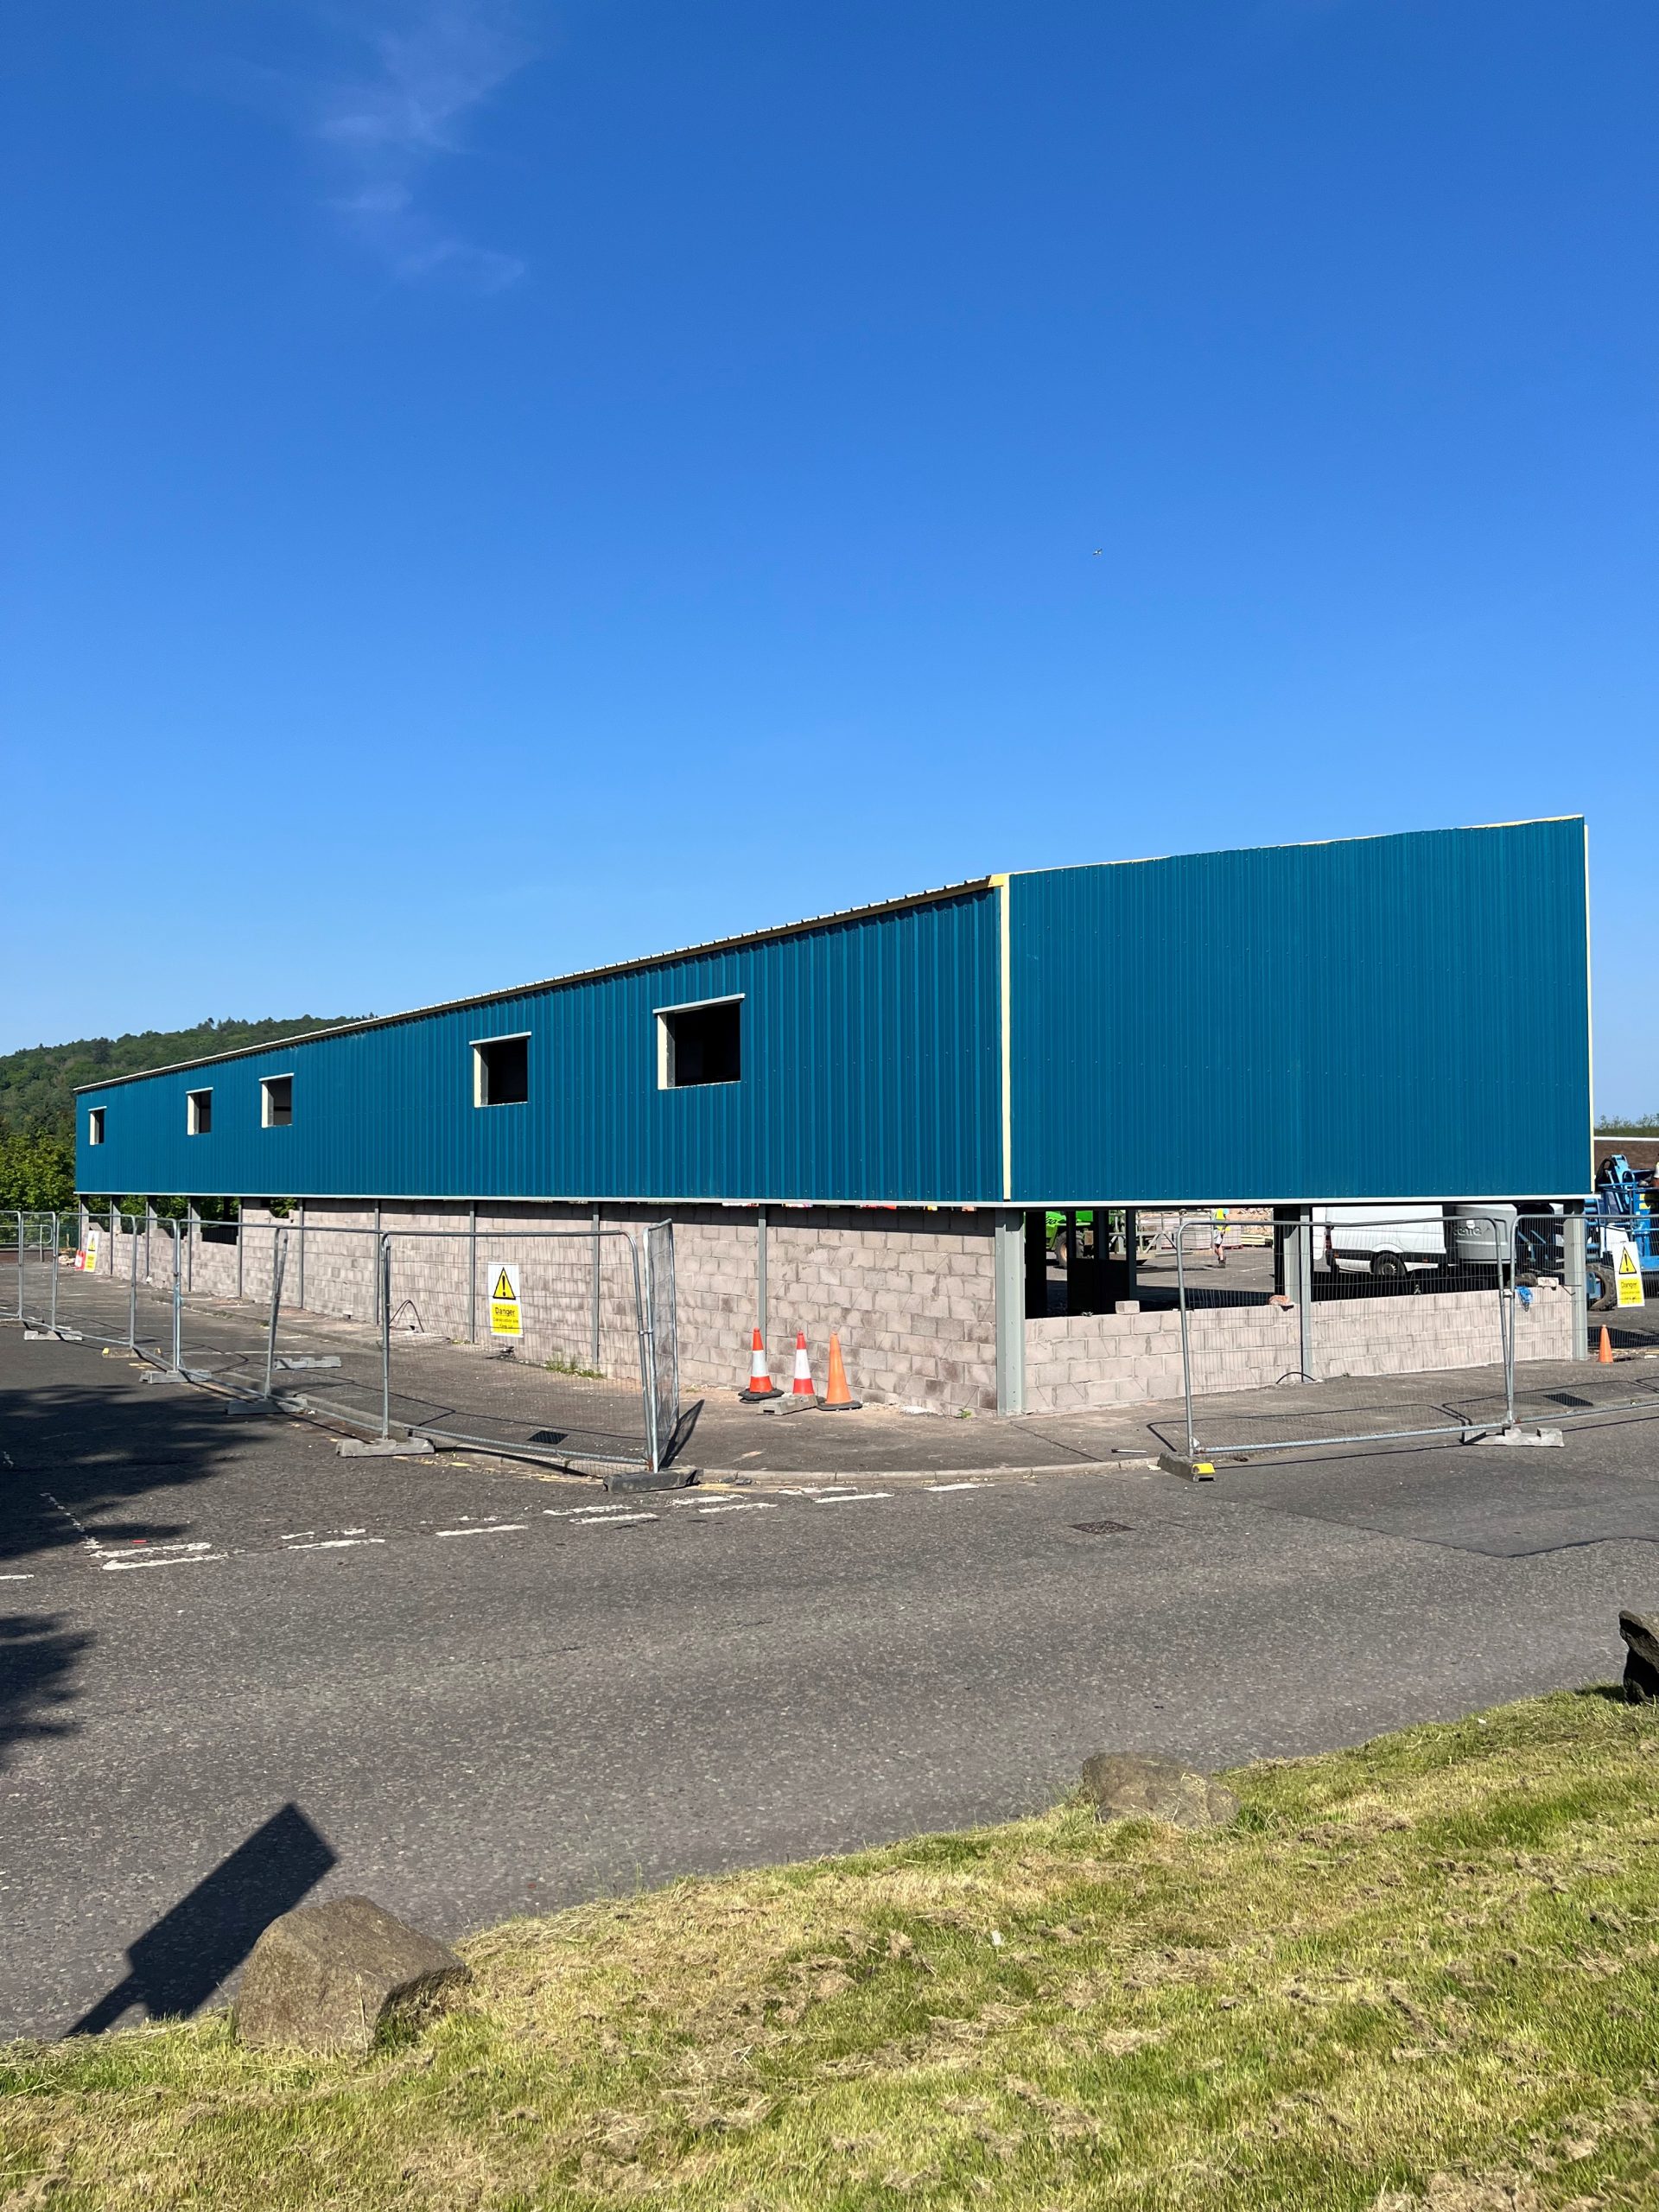 Castlecroft Mid Friarton Phase 2 New Industrial Units